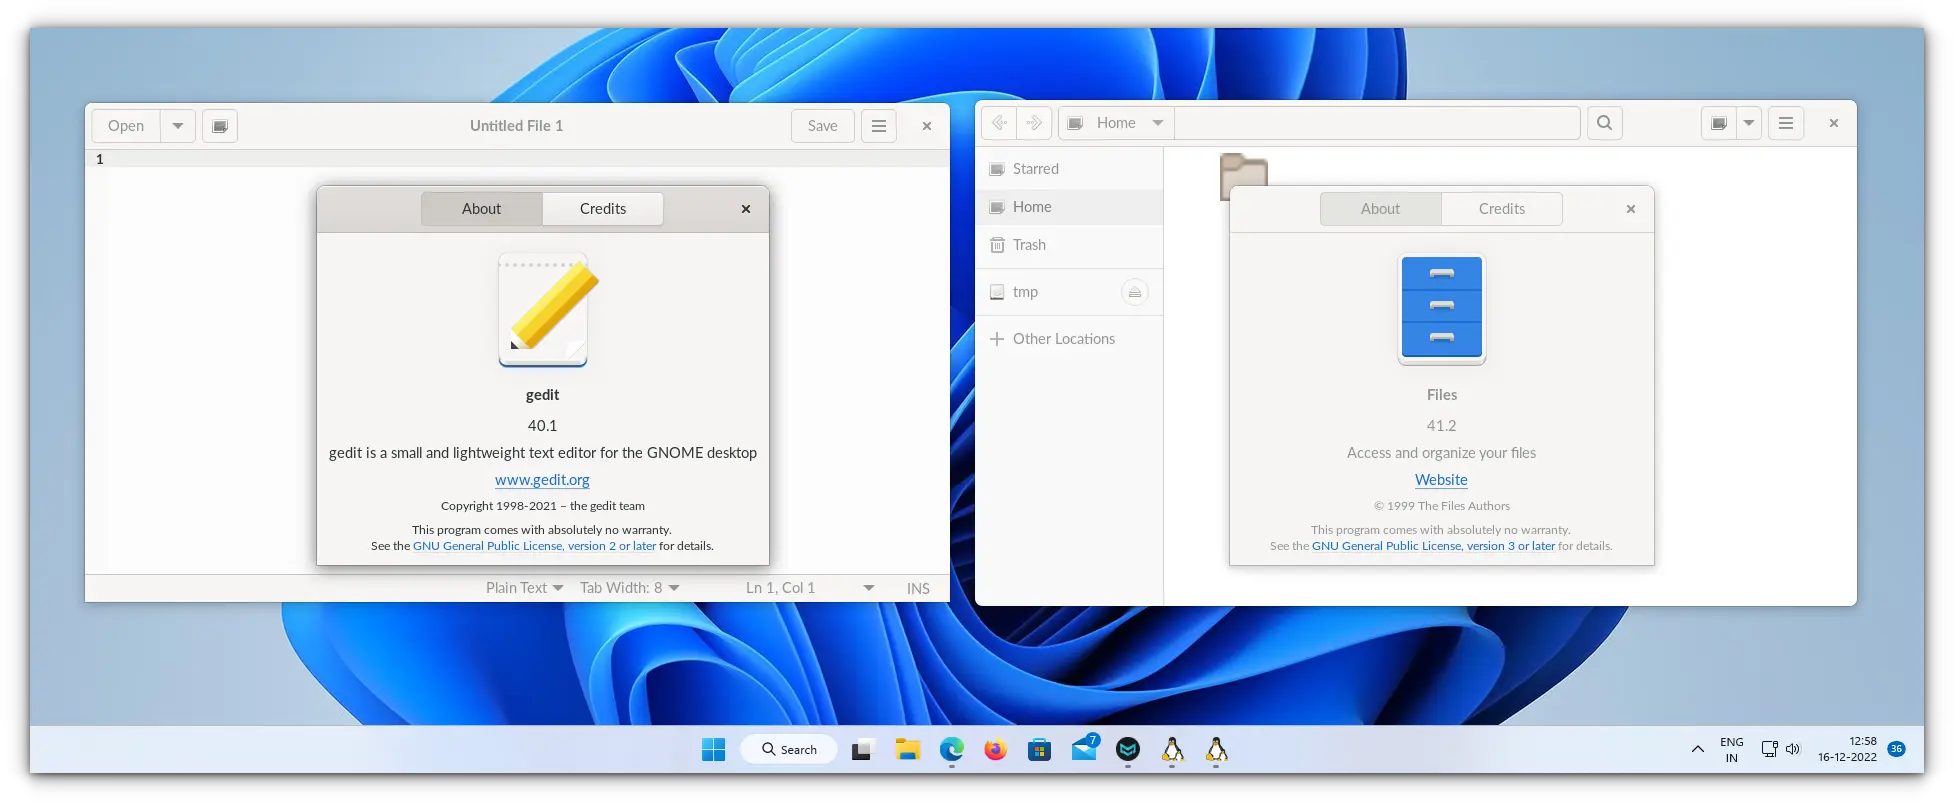 gedit text editor and nautilus file manager running in windows 11